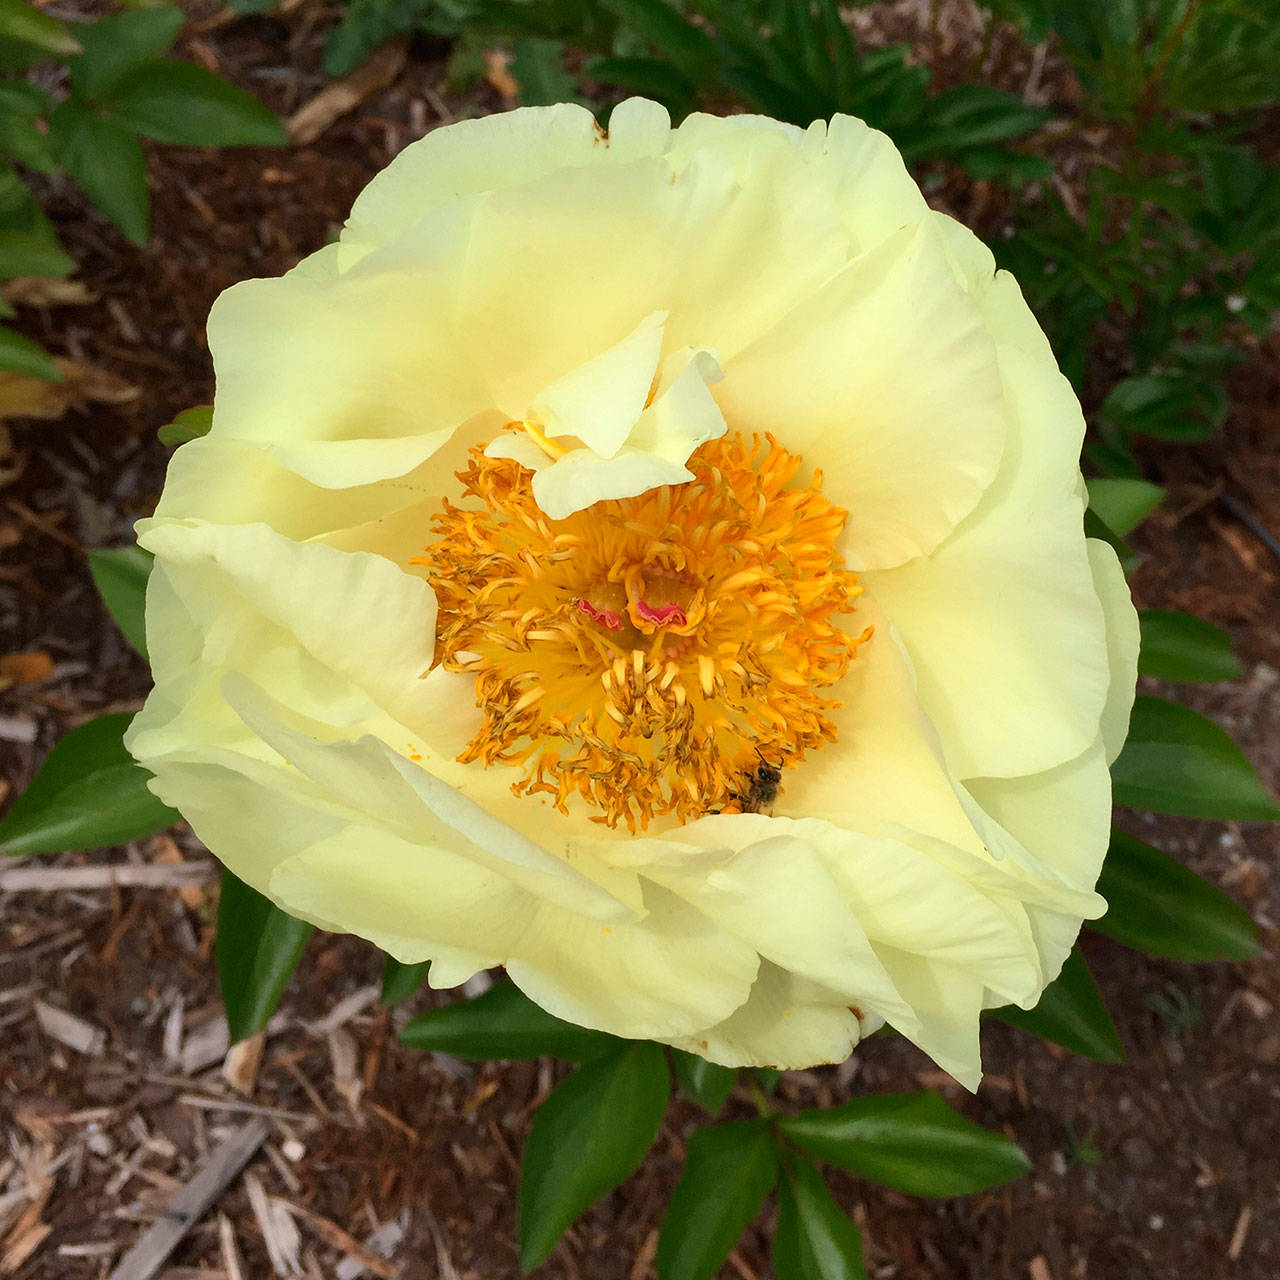 A butter yellow peony. Photo by Renne Emiko Brock